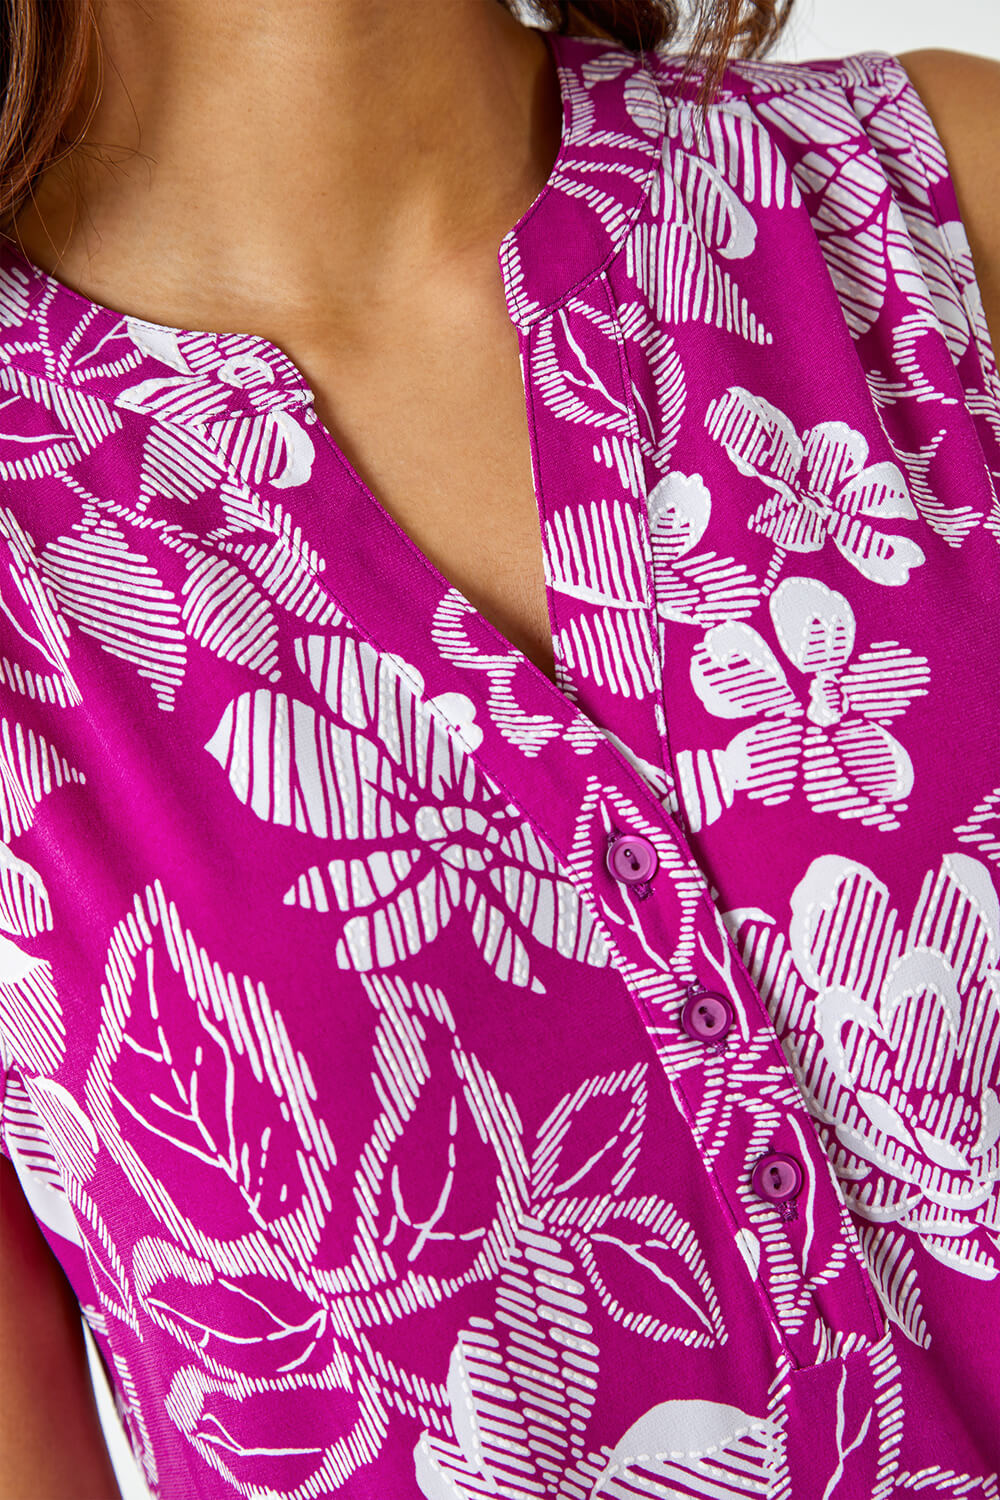 MAGENTA Textured Floral Print Sleeveless Top, Image 5 of 5